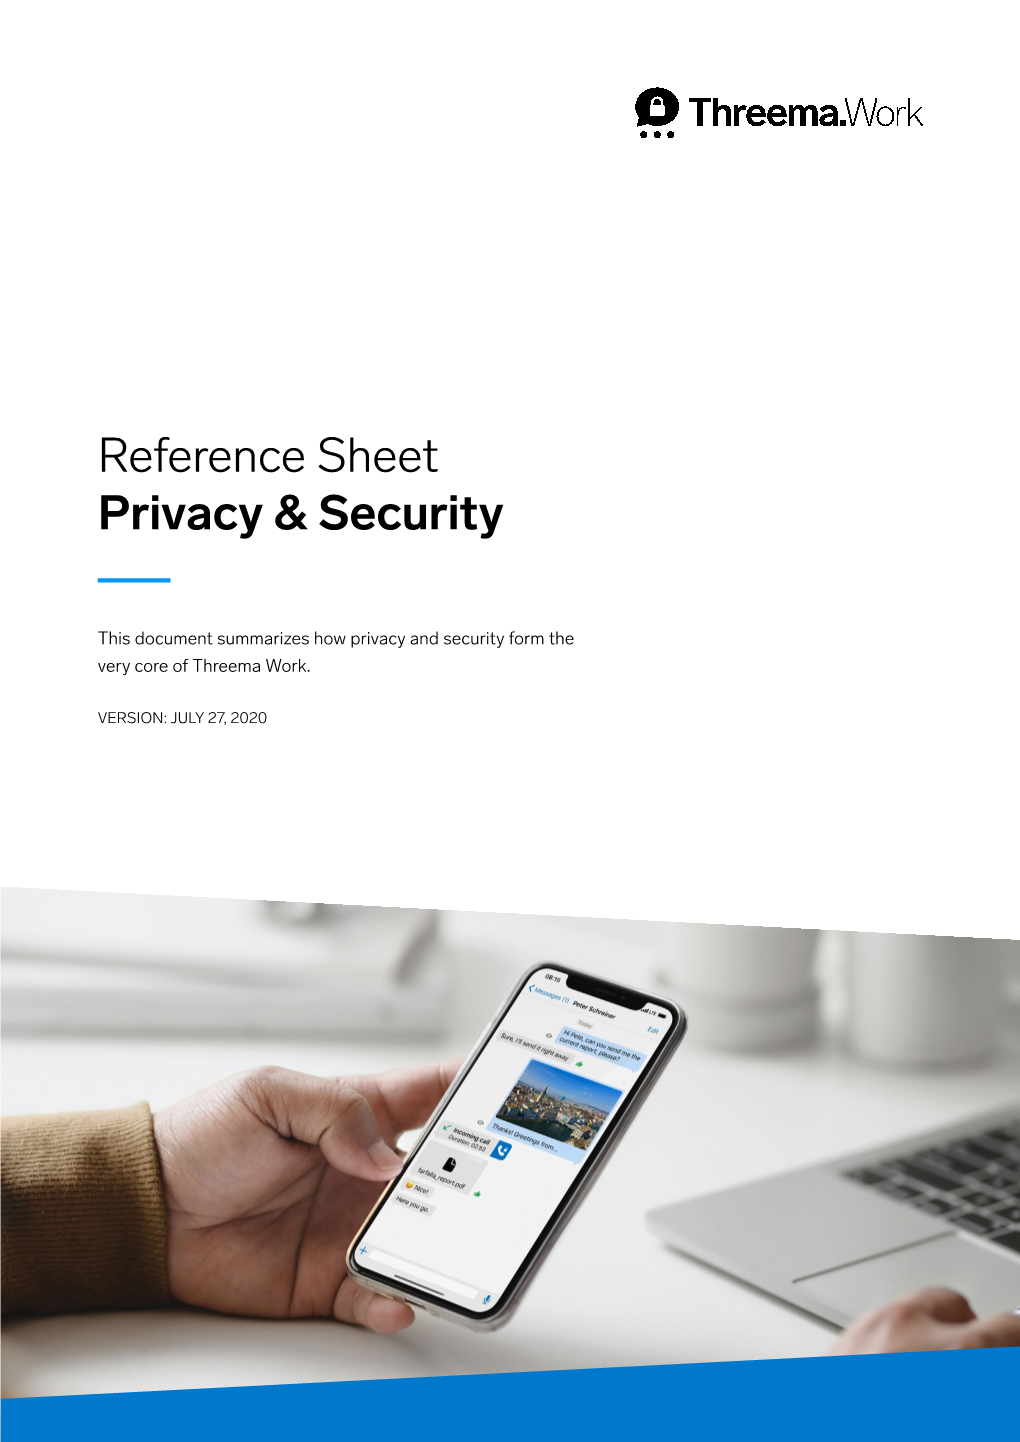 Privacy and Security Form the Very Core of Threema Work